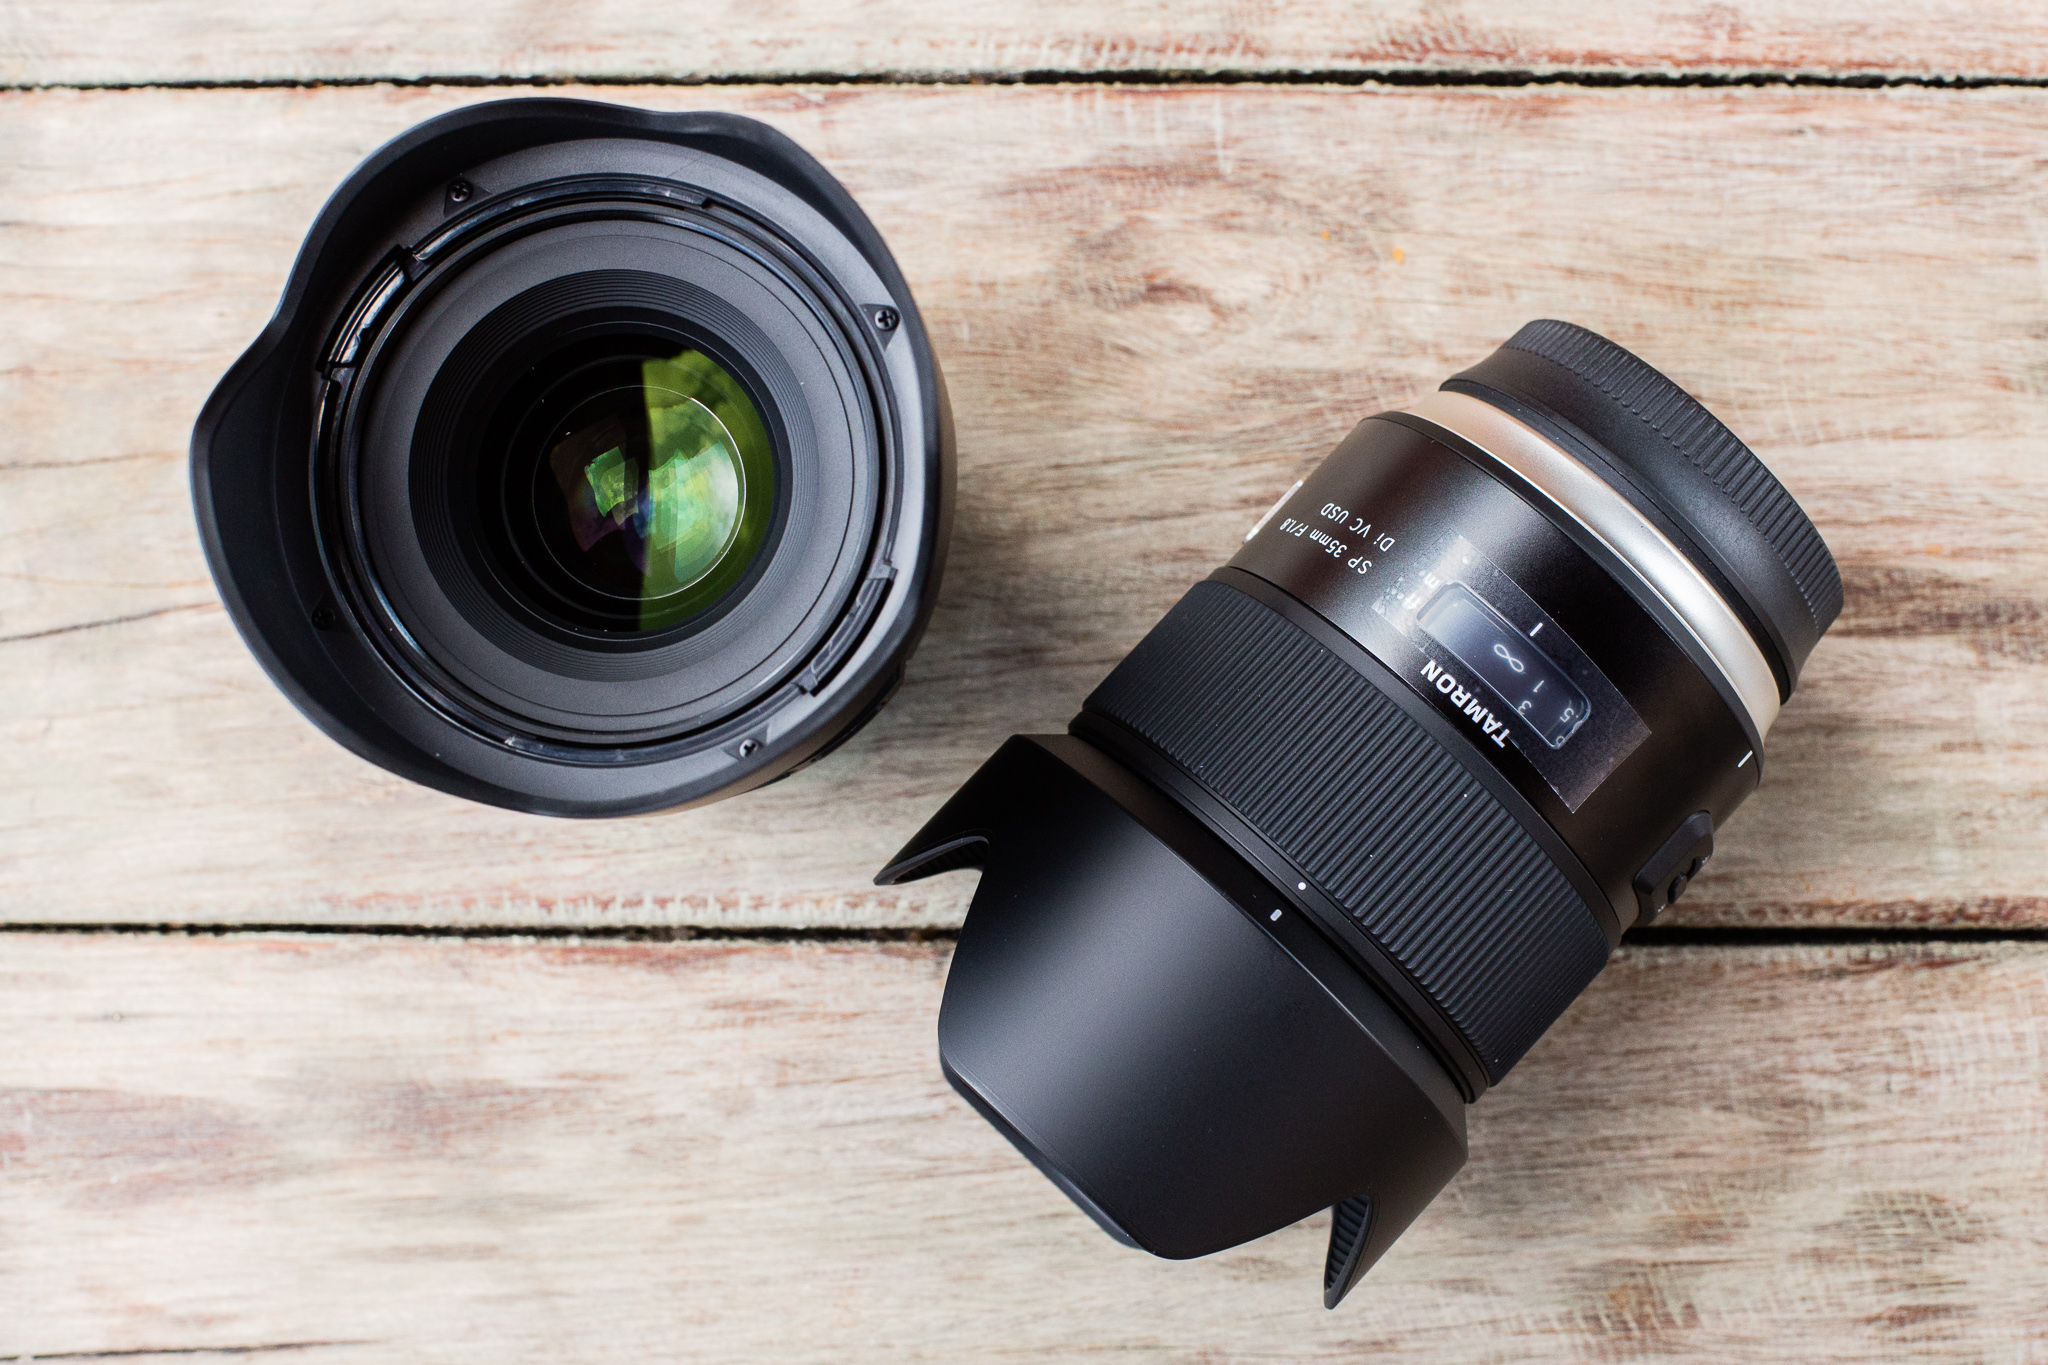 Tamron's SP 35mm f/1.8 and SP 45mm f/1.8 Close-Focusing Lenses Are 